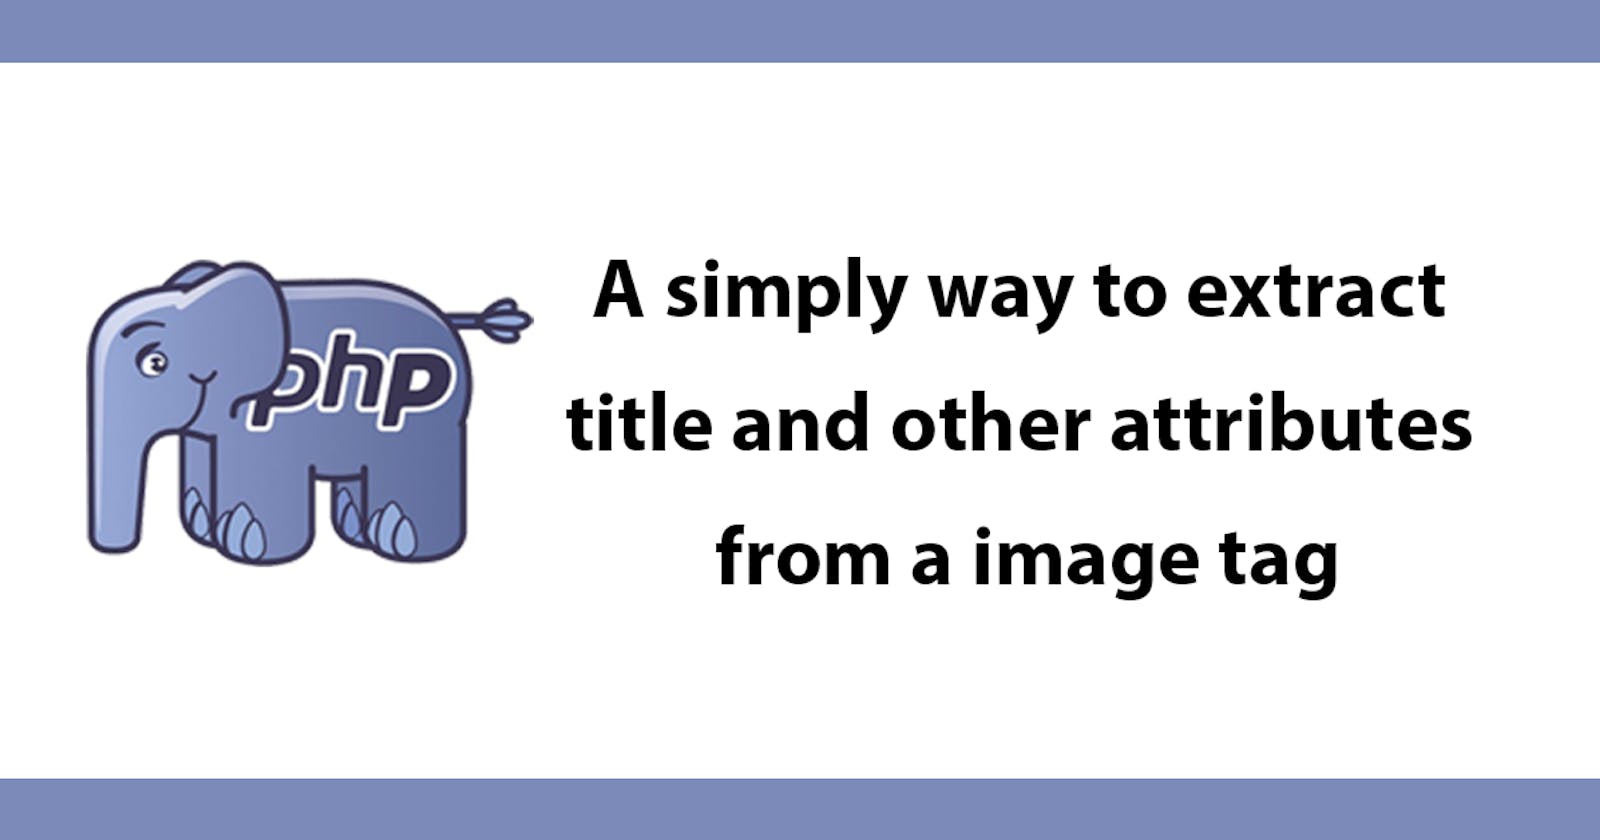 A simply way to extract title and other attributes from a image tag